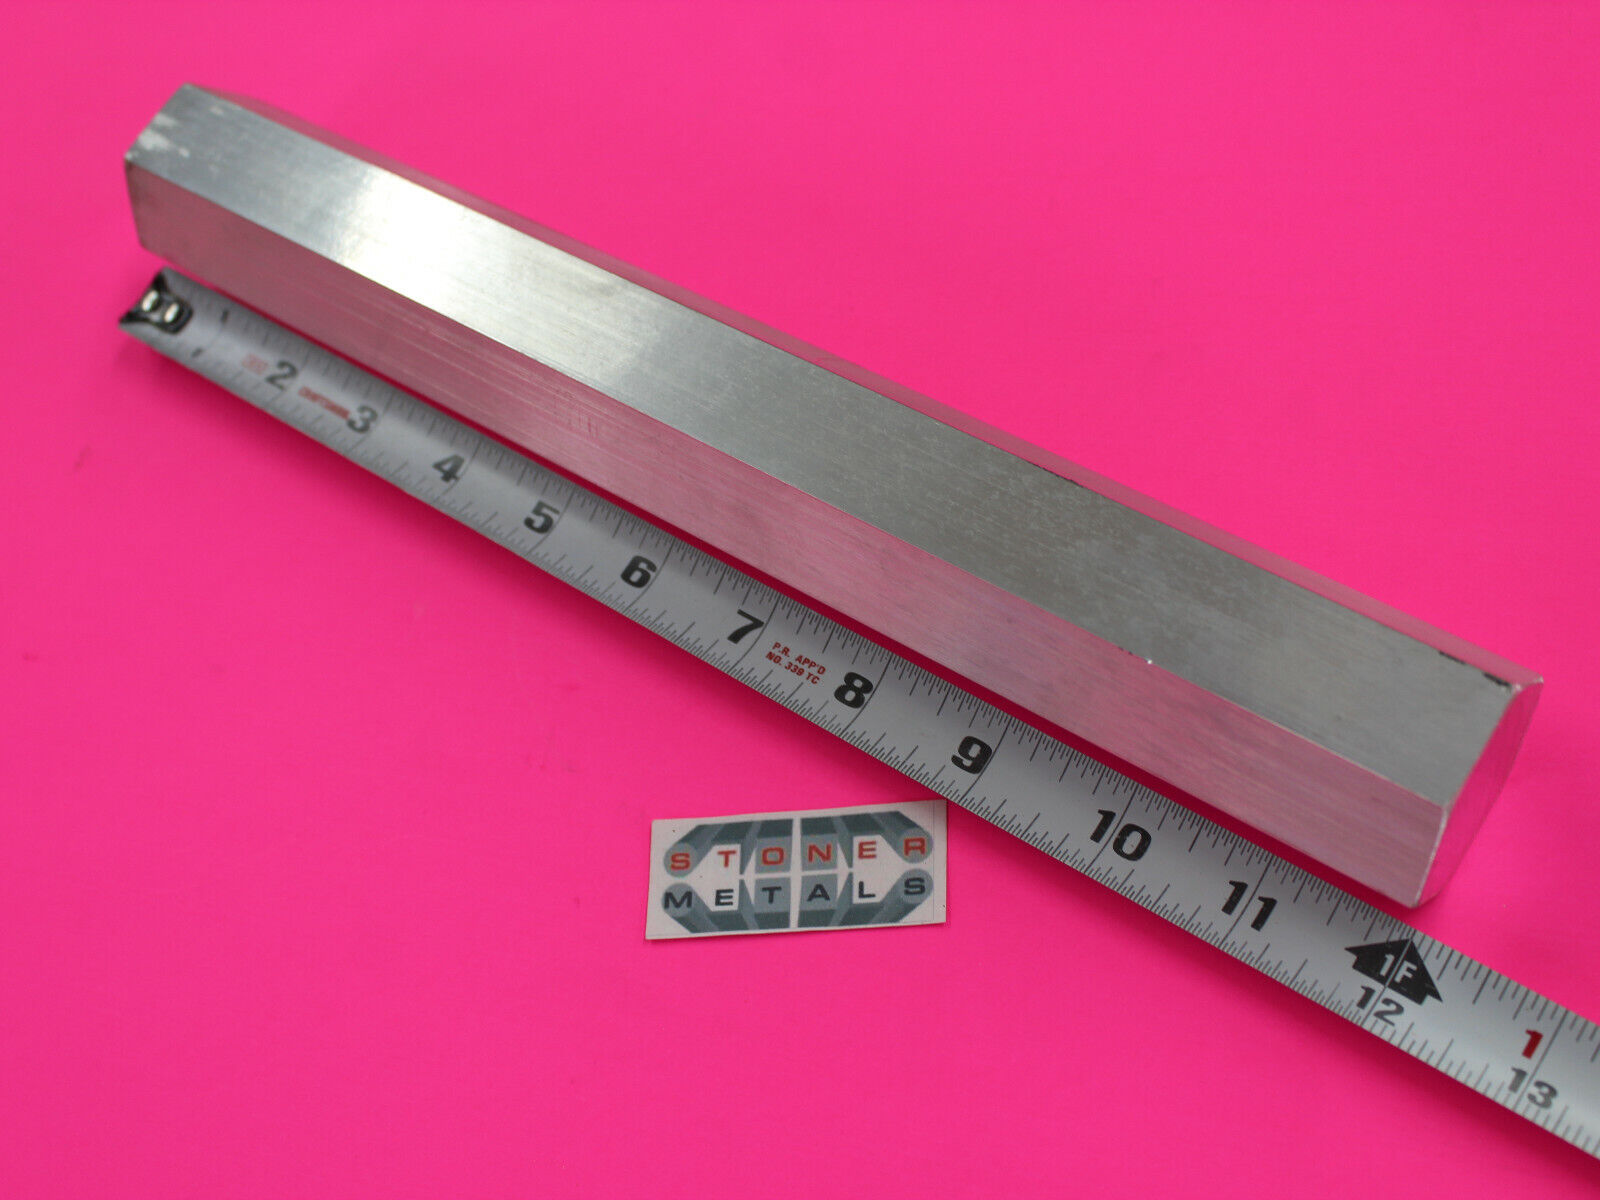 Hex 1-1/2" Aluminum 6061 Hex Bar 12" Long T6511 Solid Extruded Lathe Stock